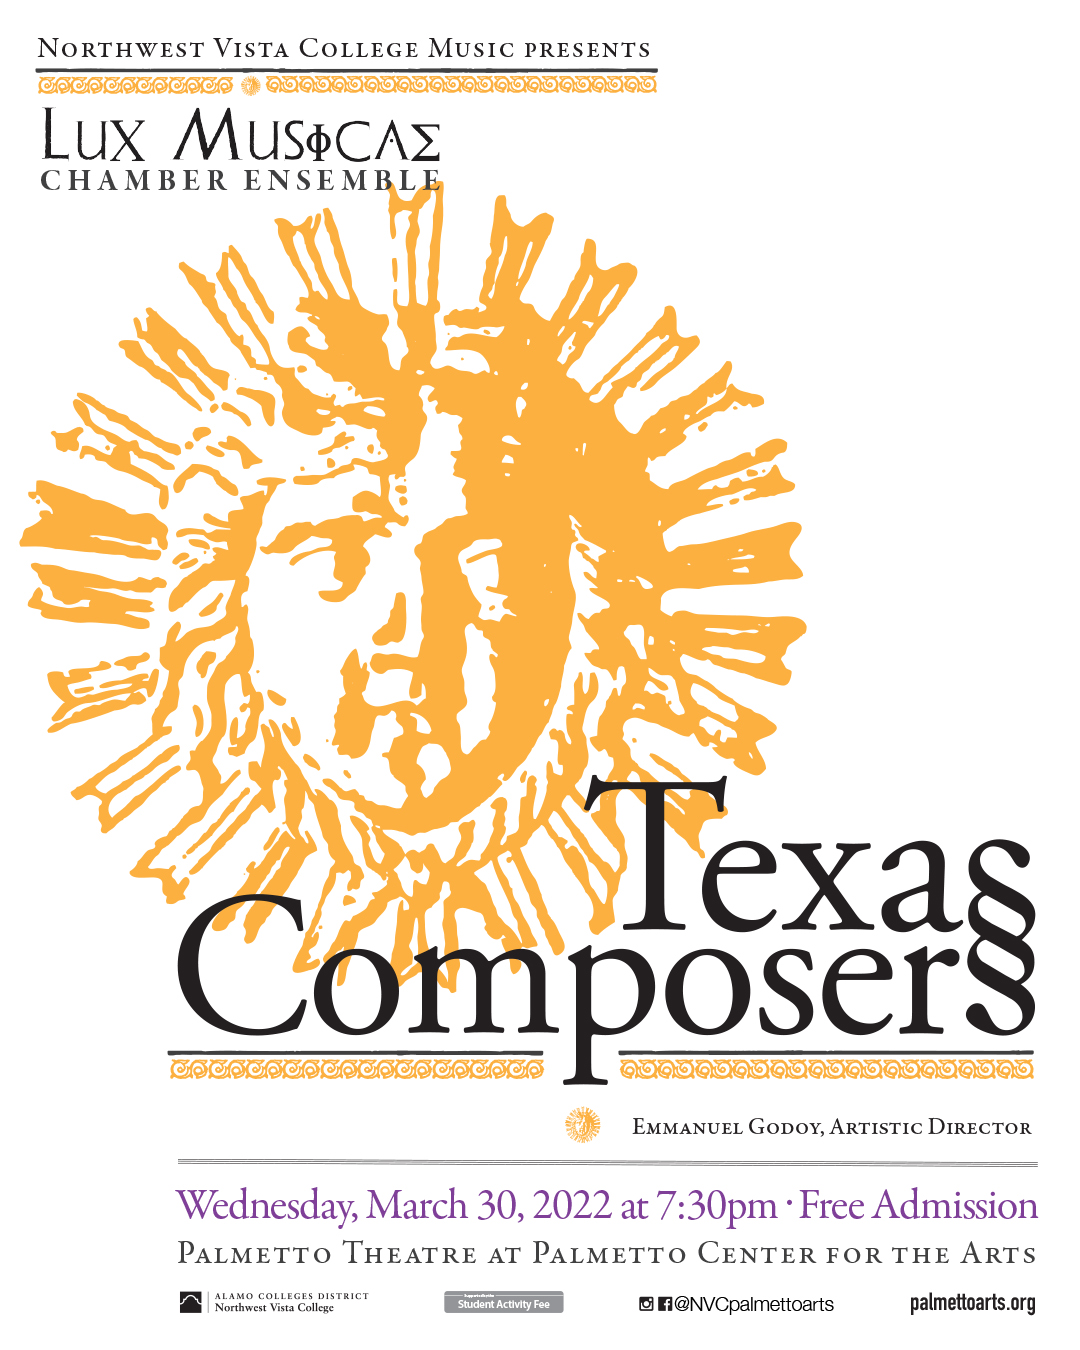 Lux Musicae TX Composers